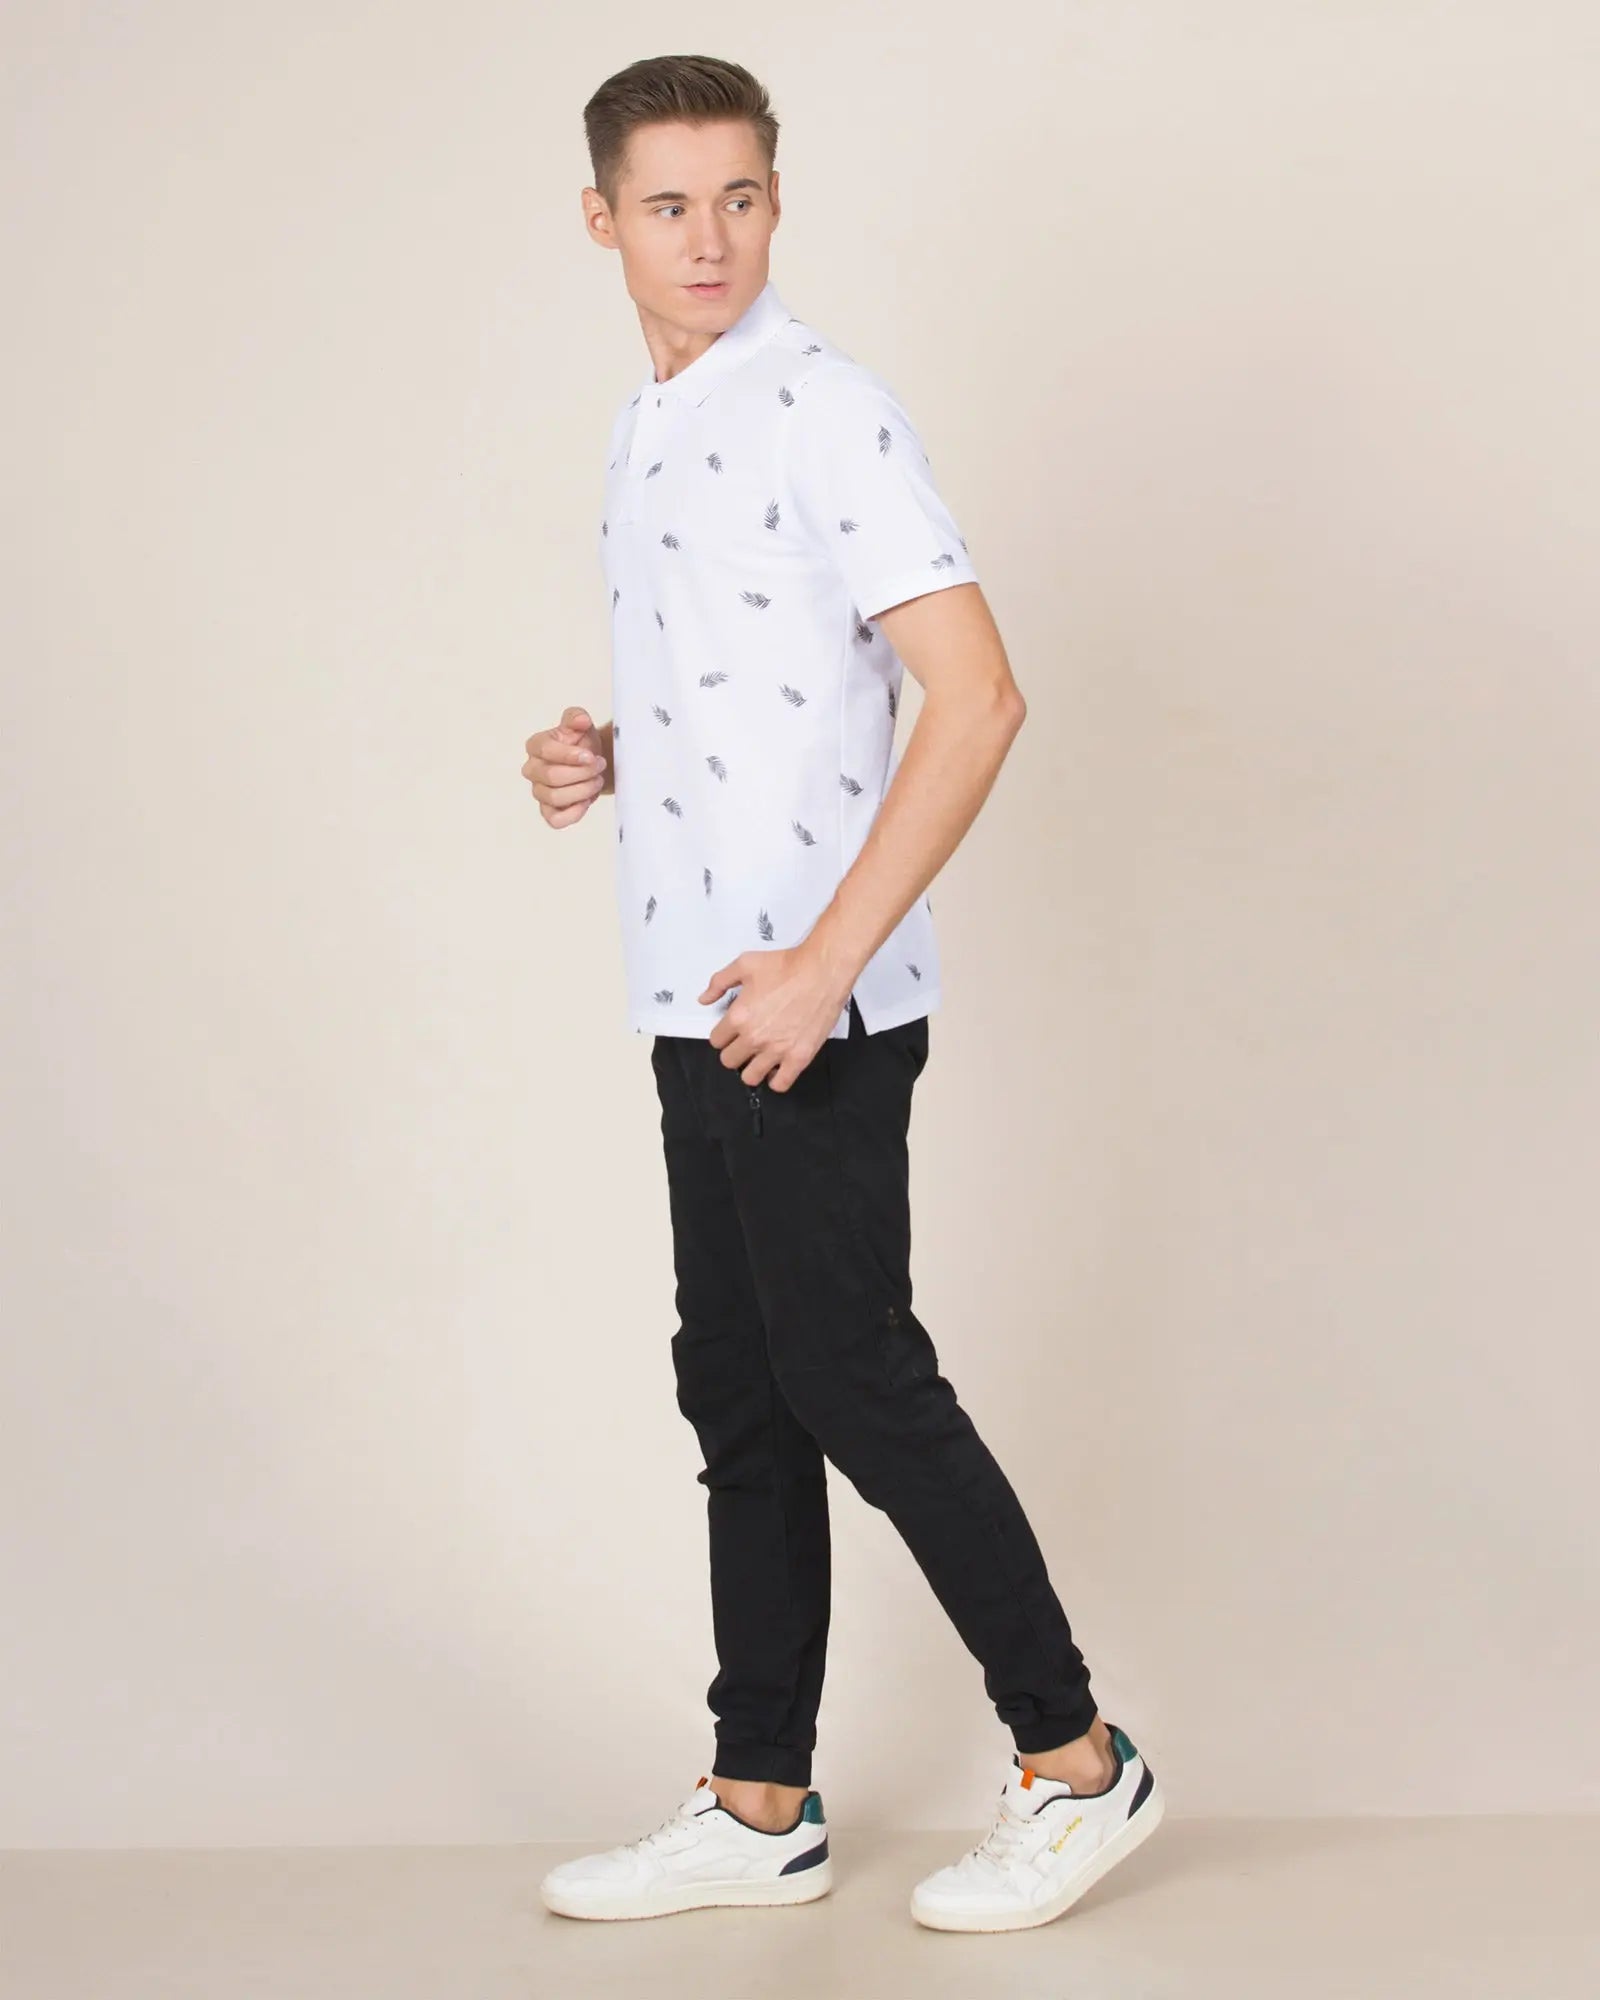 LCY London | Art of Summer - Tropical Inspired Printed Men's Short Sleeved Polo Shirt LCY London